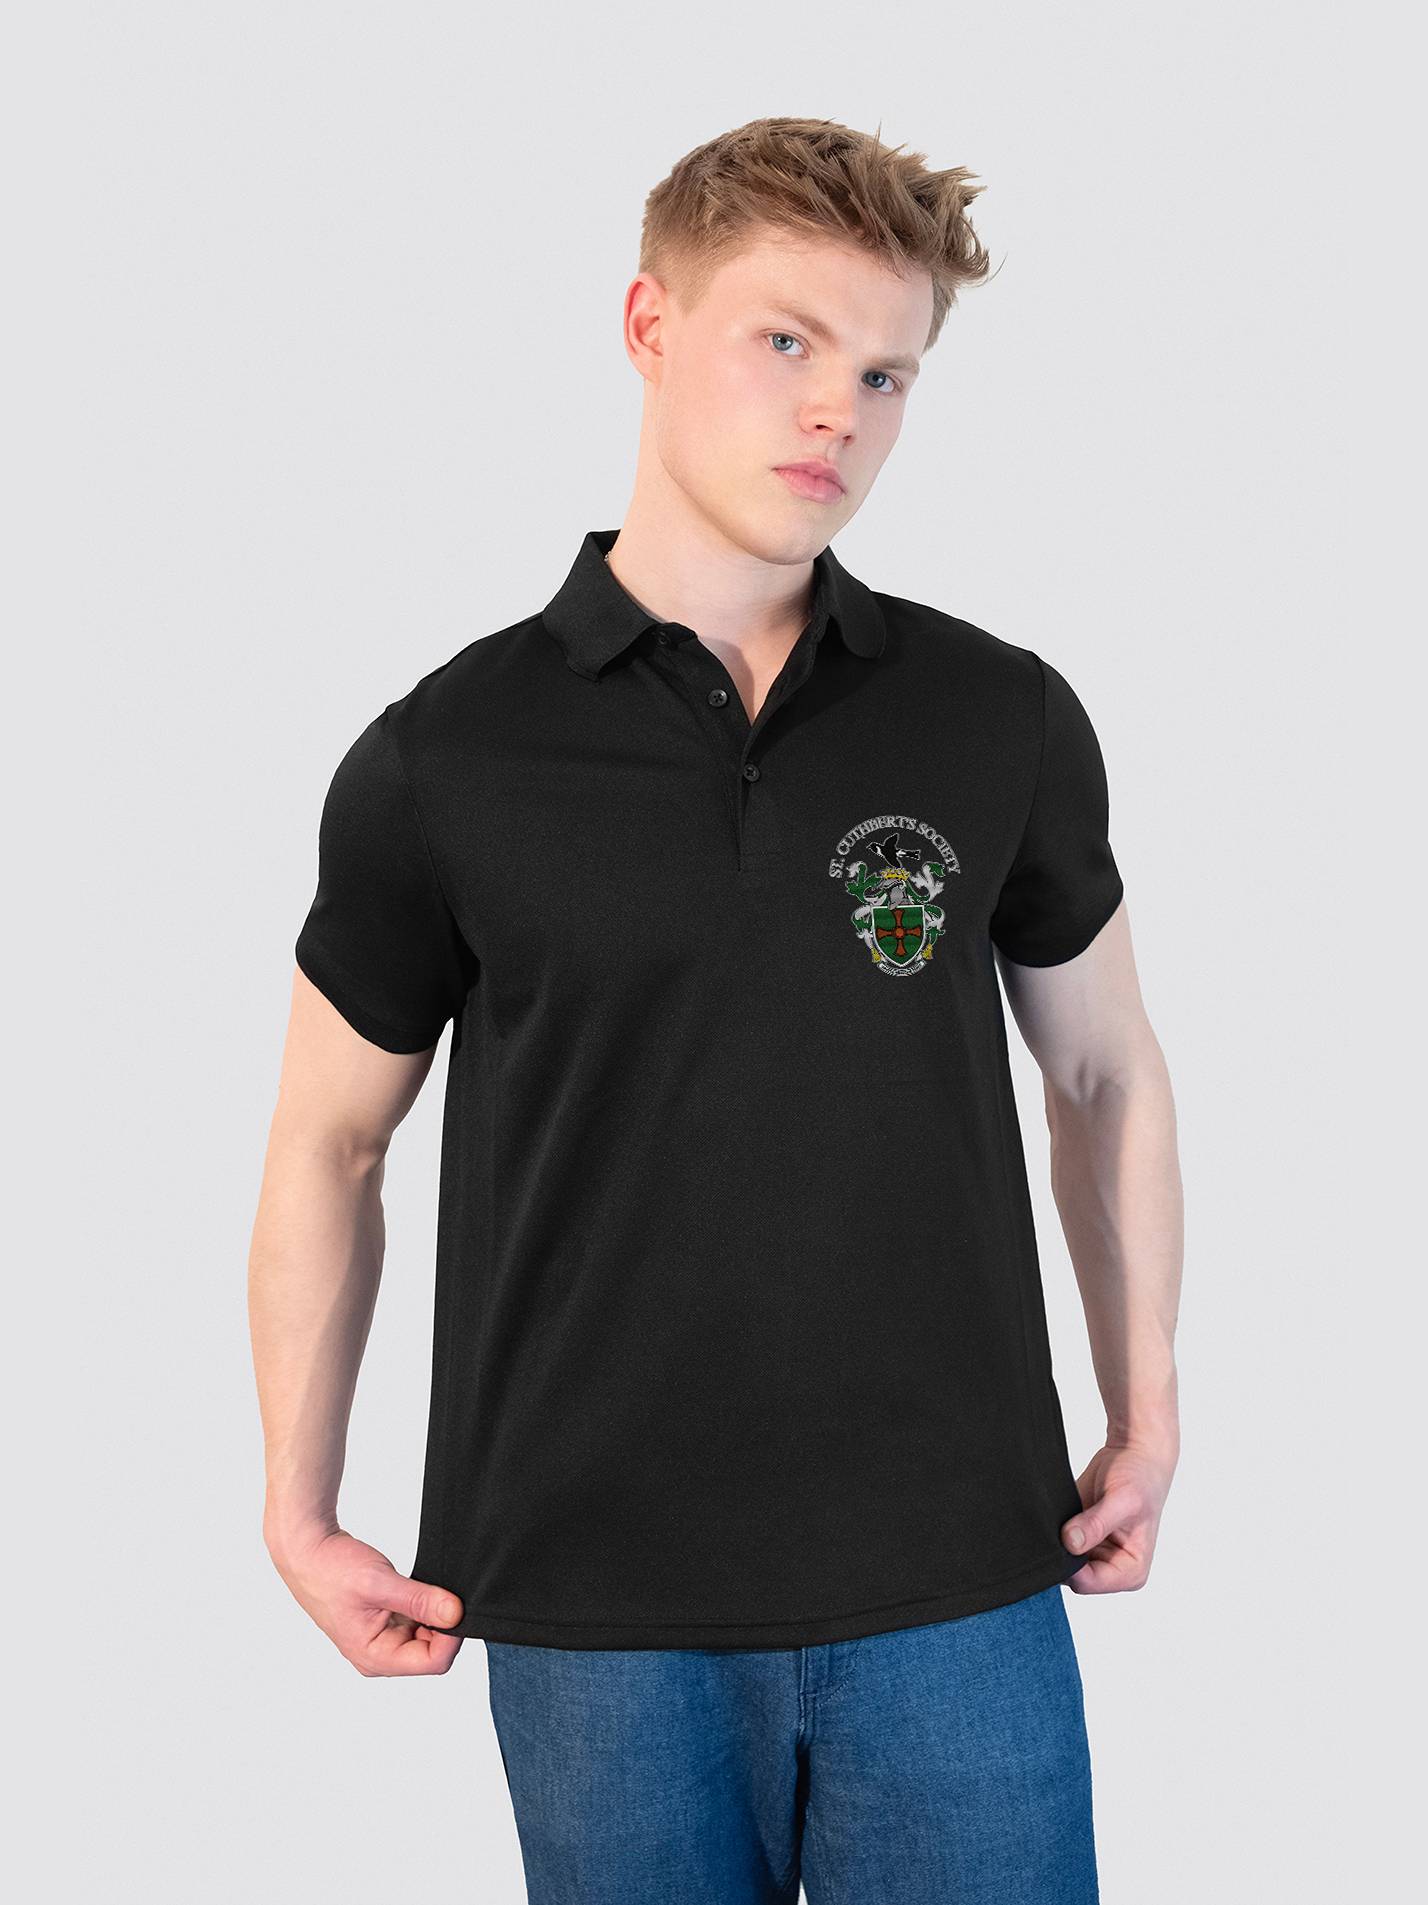 St Cuthbert's Society Durham Sustainable Men's Polo Shirt